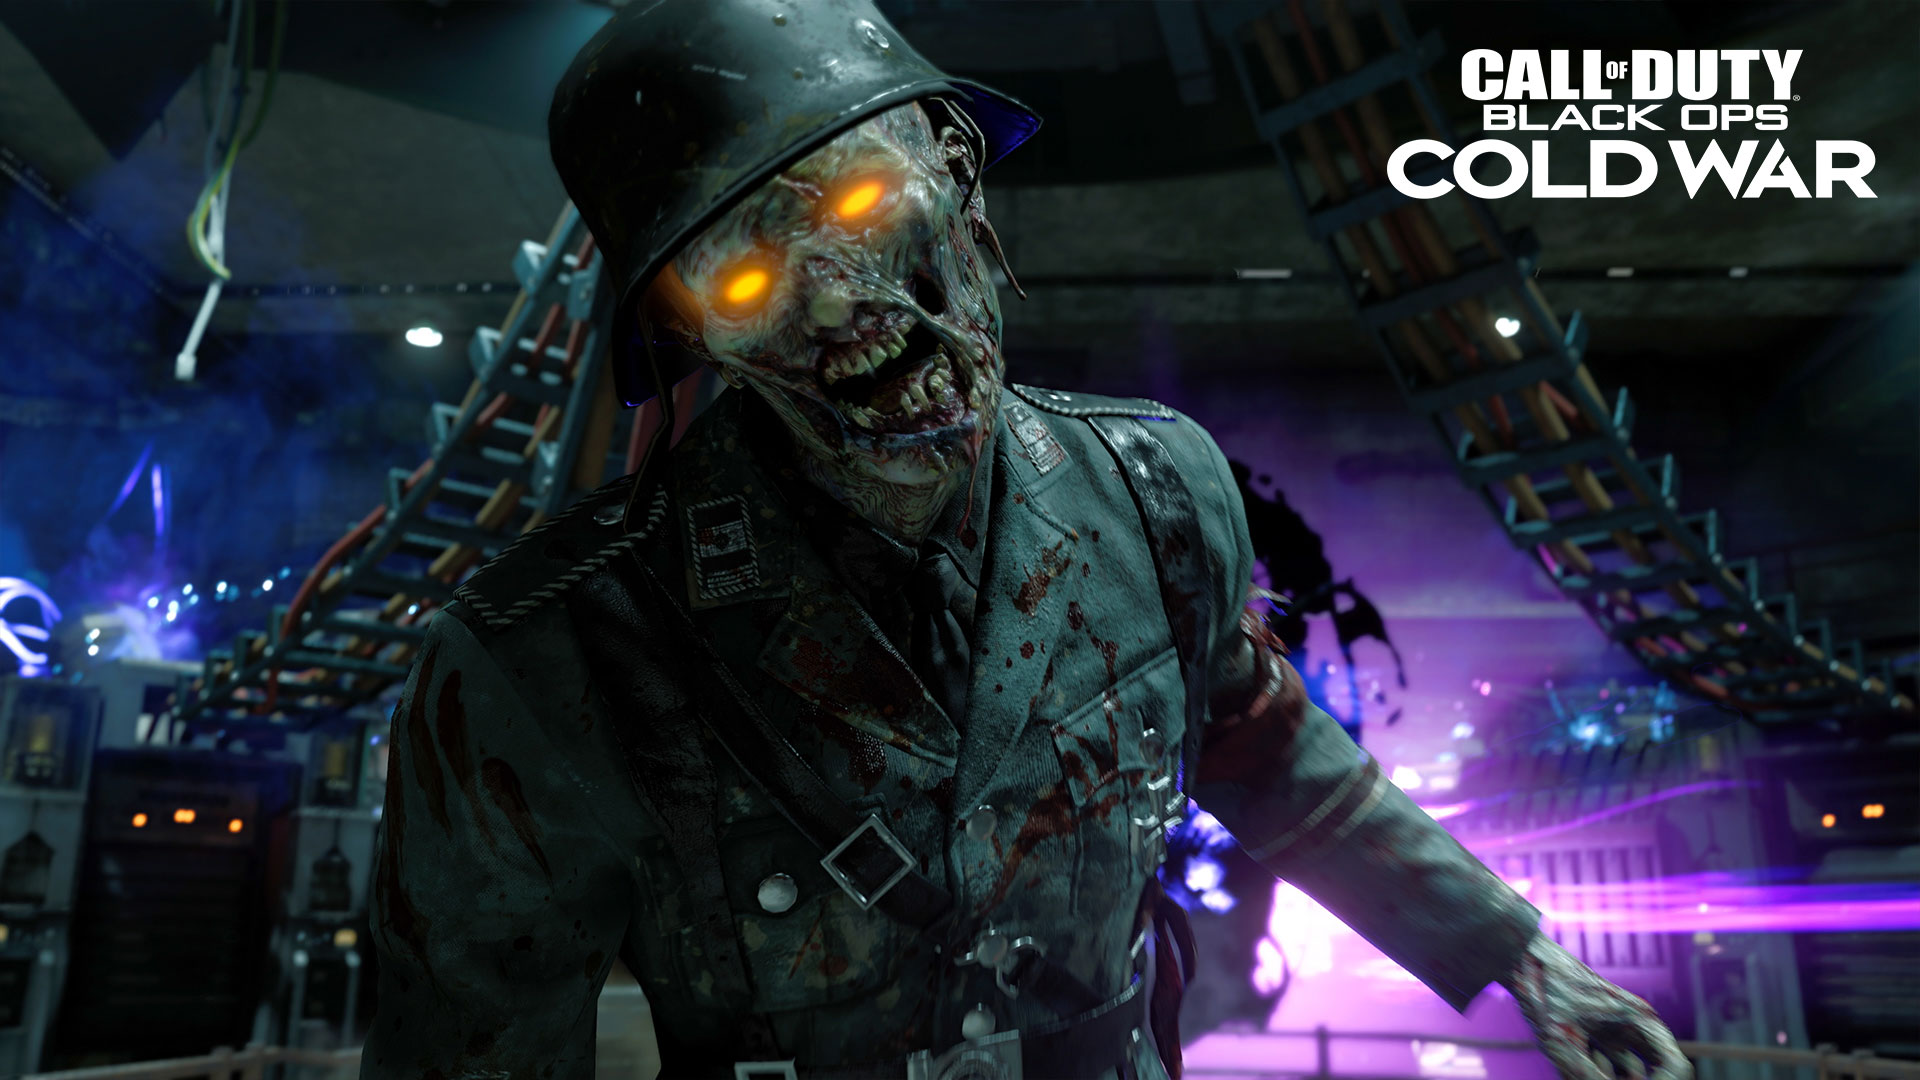 Zombies Cogadh Fuar Call Of Duty Black Ops